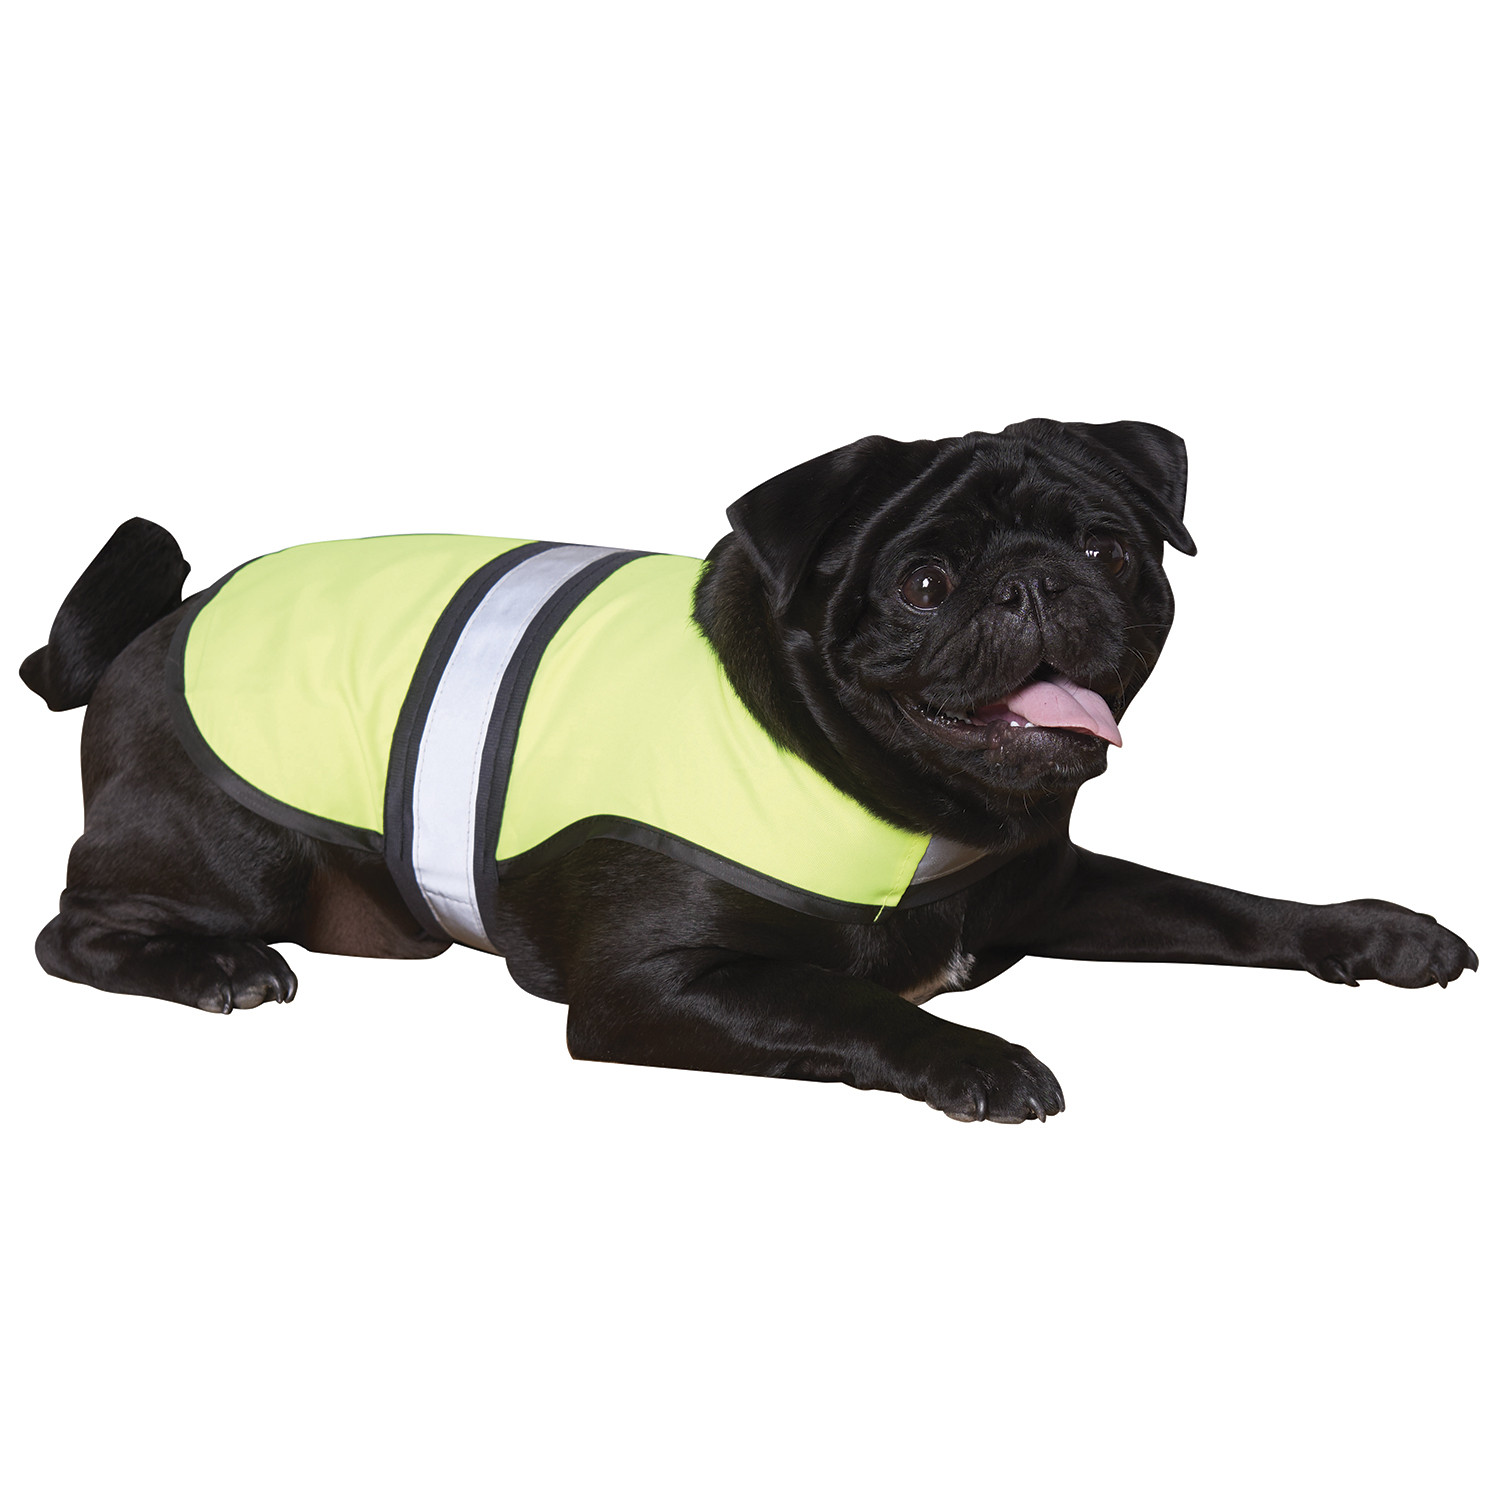 Lightweight High Visibility Gilet - M Image 2